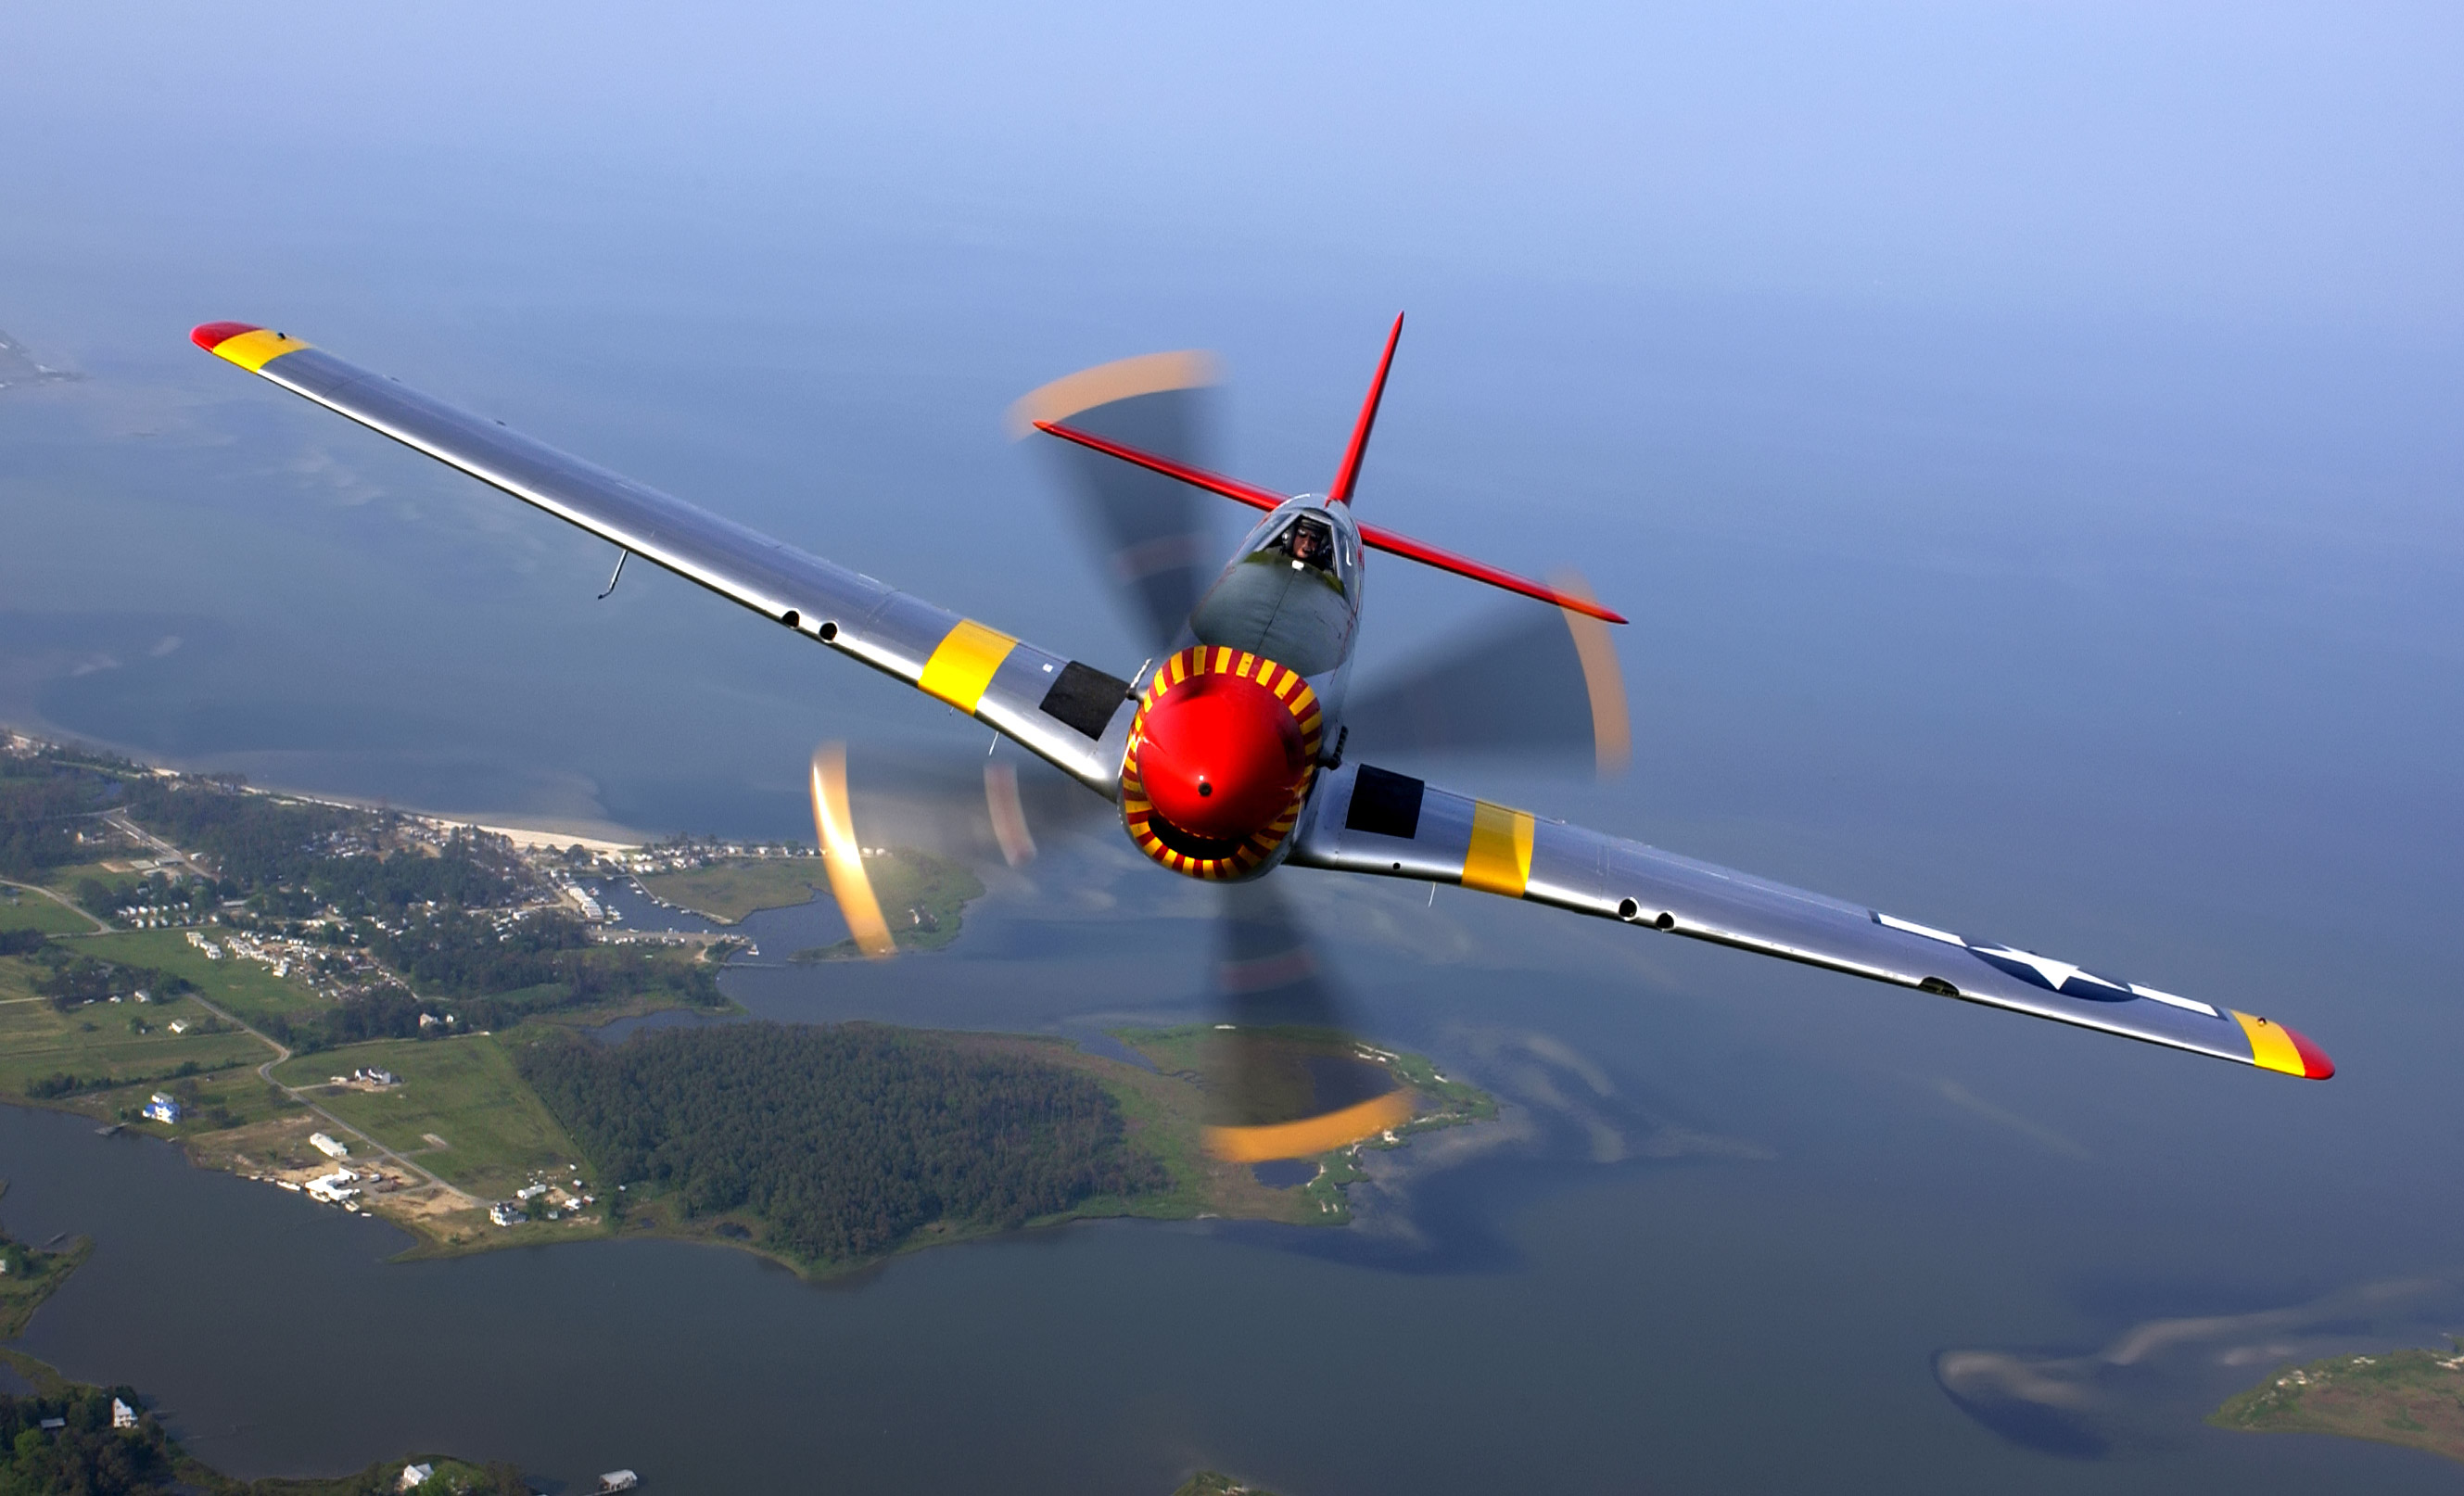 Vintage WWII fighter plane to fly sightseers over Hawaii